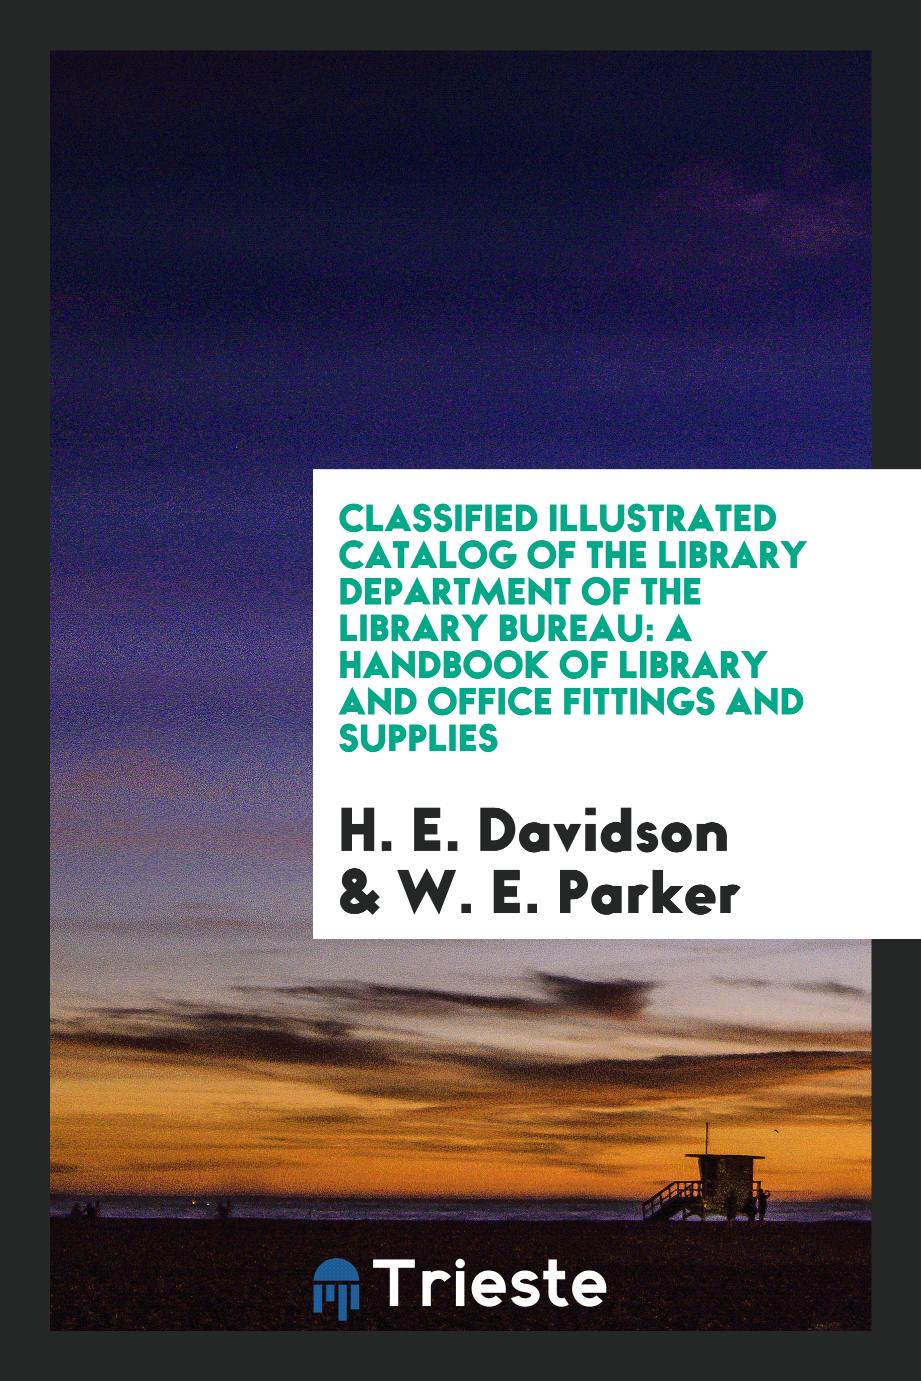 Classified Illustrated Catalog of the Library Department of the Library Bureau: A Handbook of Library and Office Fittings and Supplies